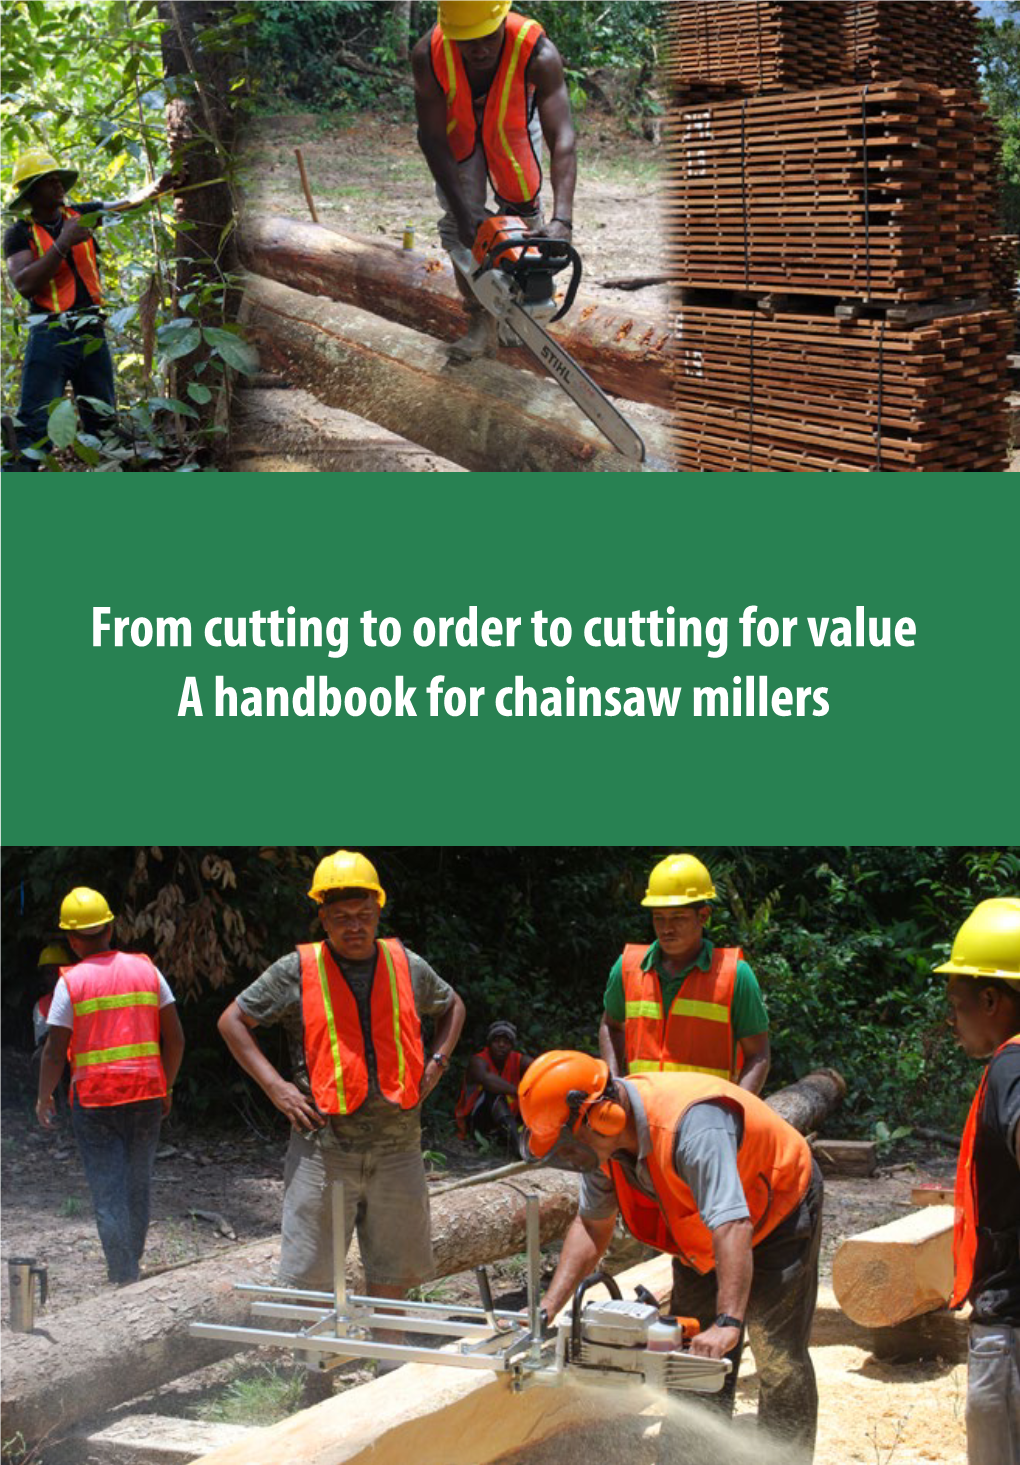 From Cutting to Order to Cutting for Value a Handbook for Chainsaw Millers